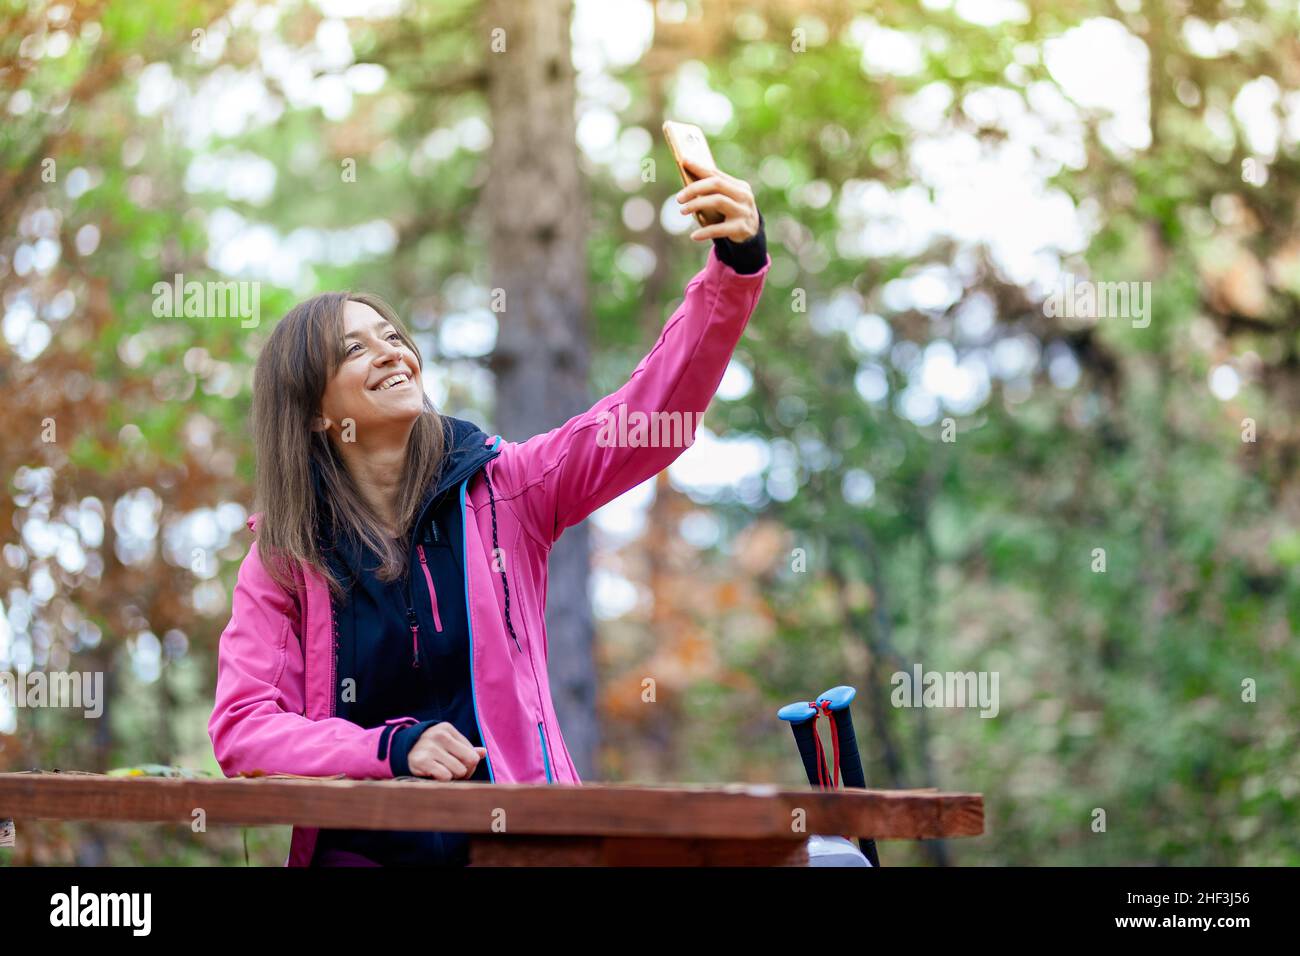 Hiker girl resting on a bench in the forest. Backpacker with pink jacket taking selfie with smartphone. Stock Photo